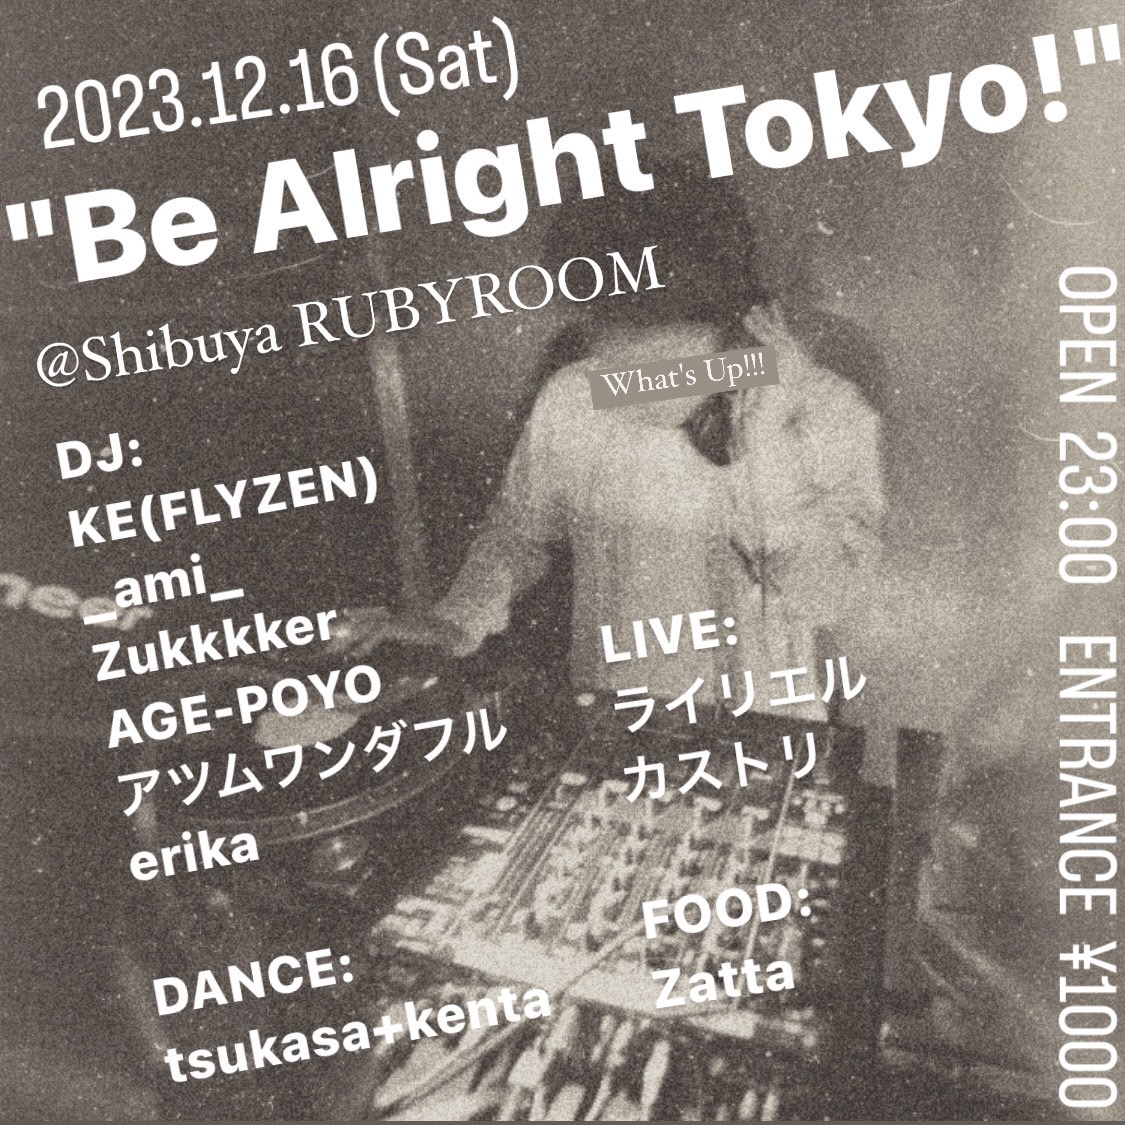 Be Alright Tokyo！ - Ruby Room